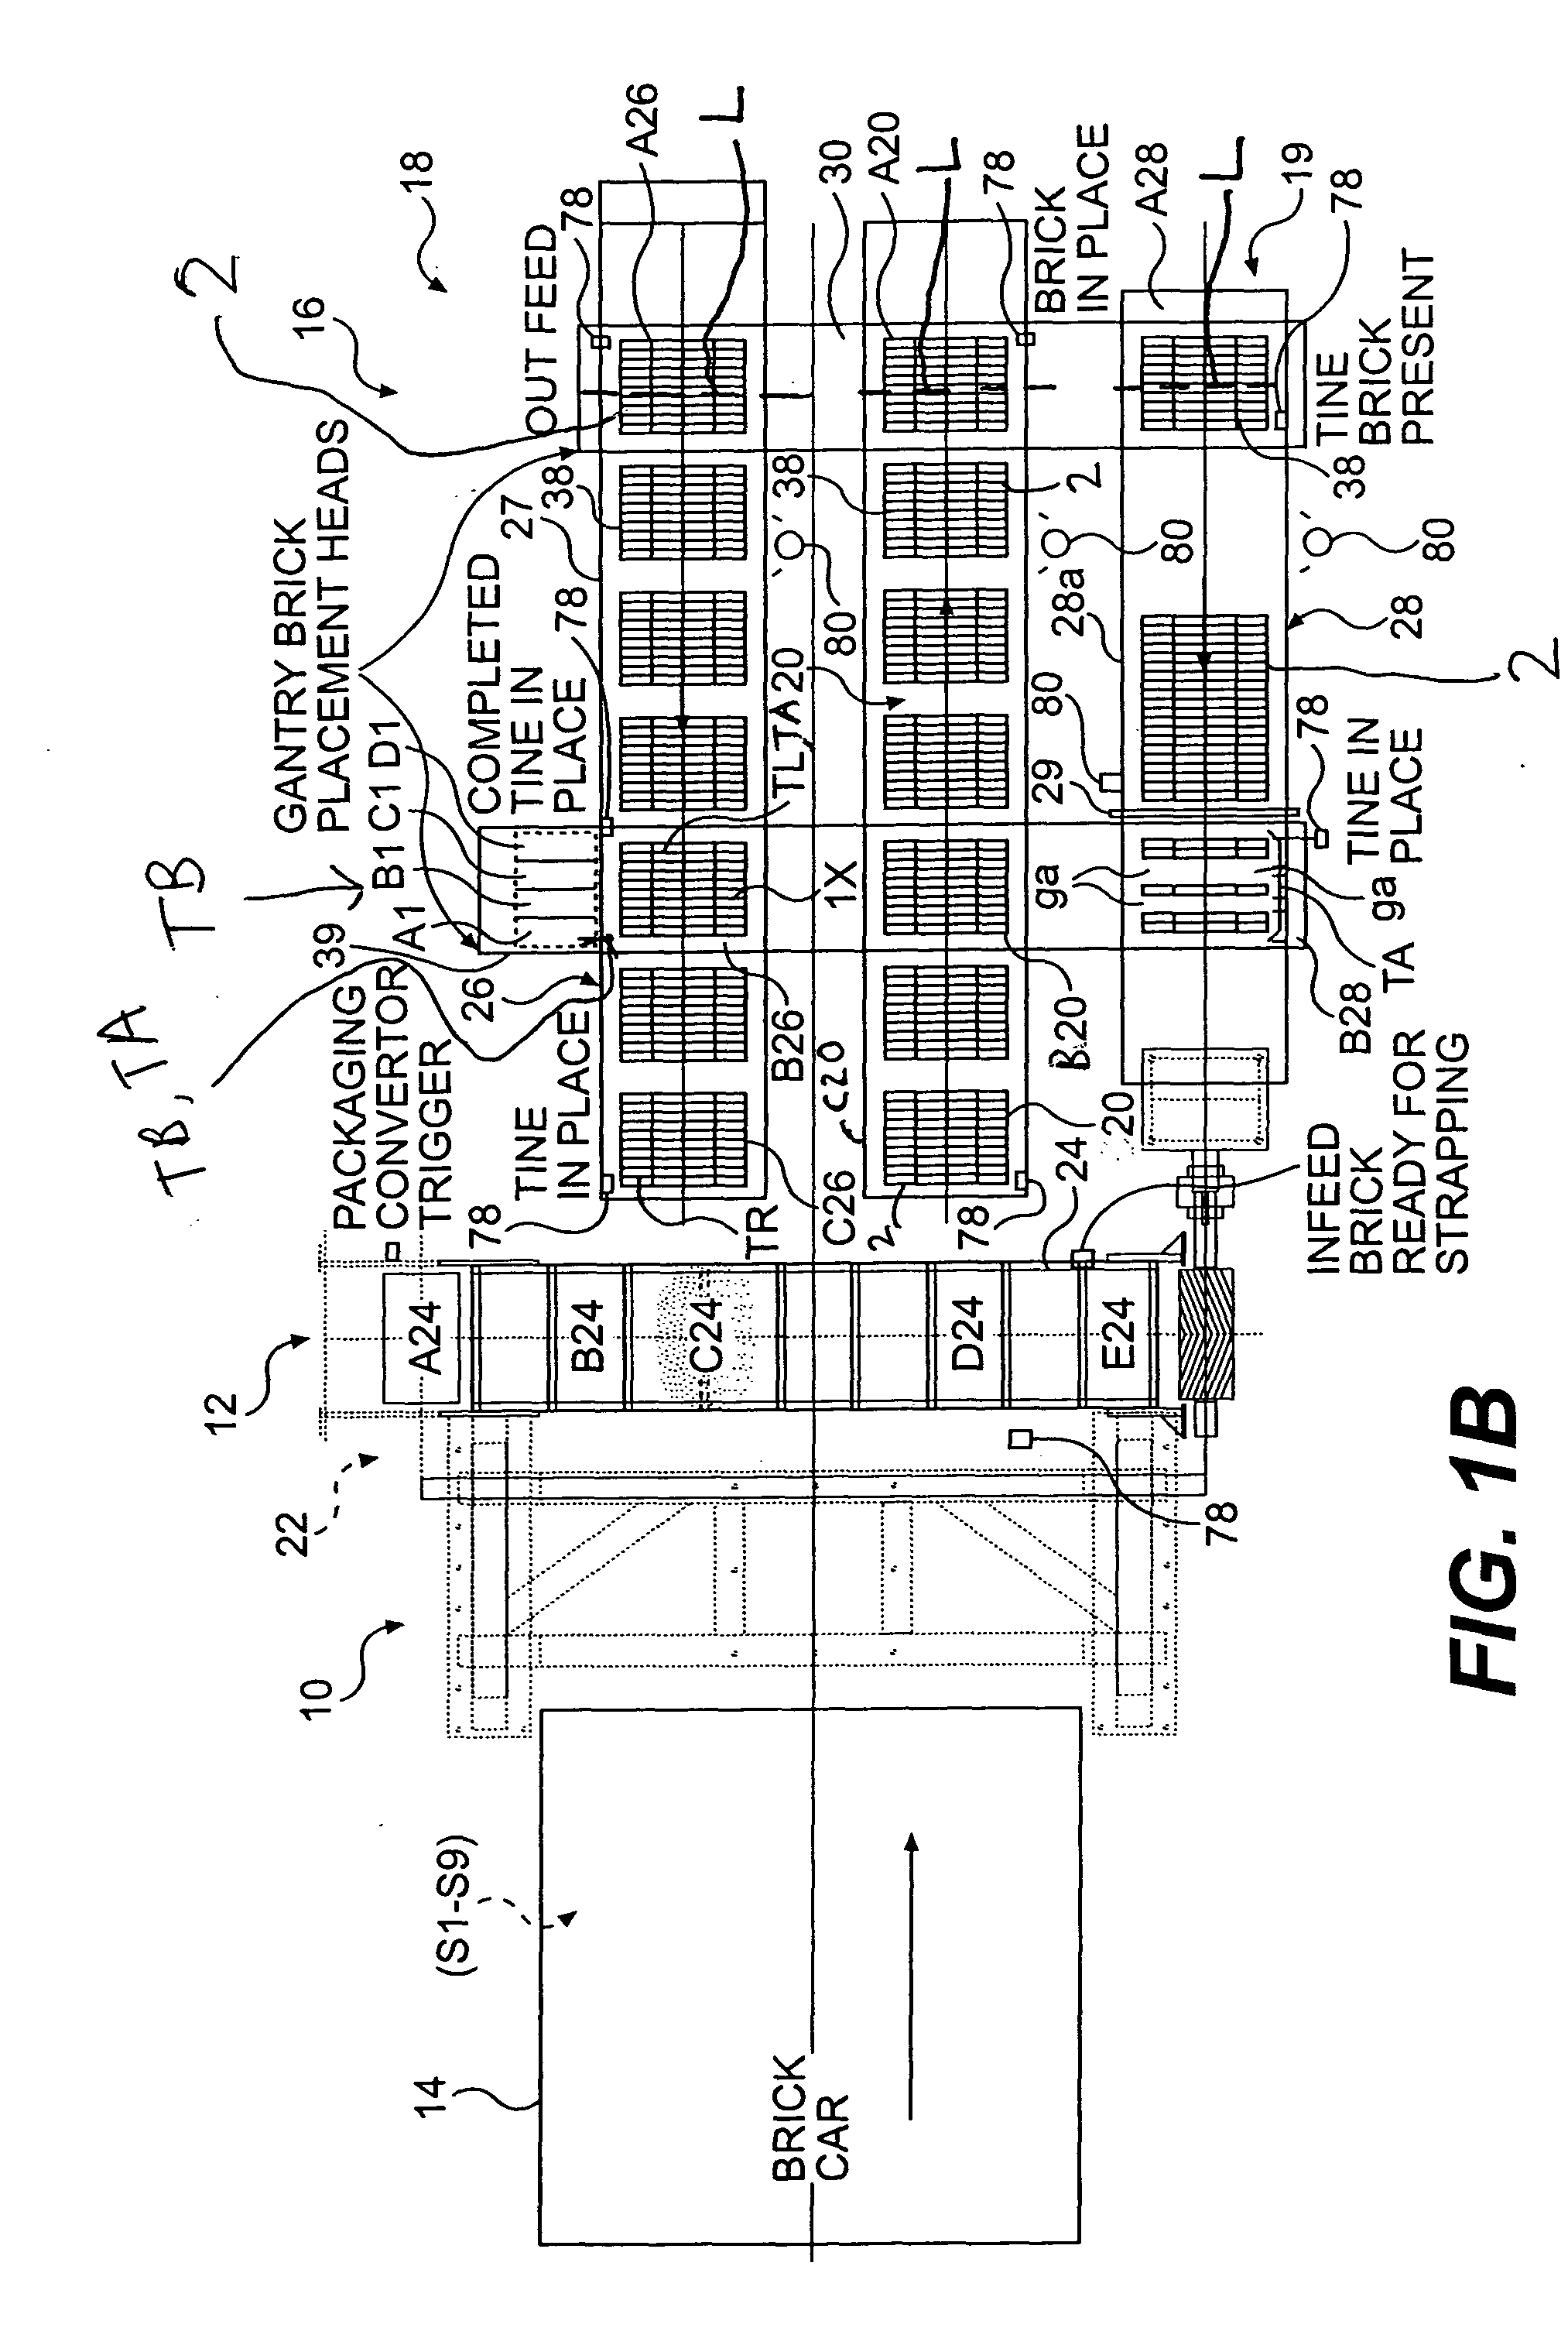 Apparatus and method for automatically unloading brick from kiln cars and preparation for shipment